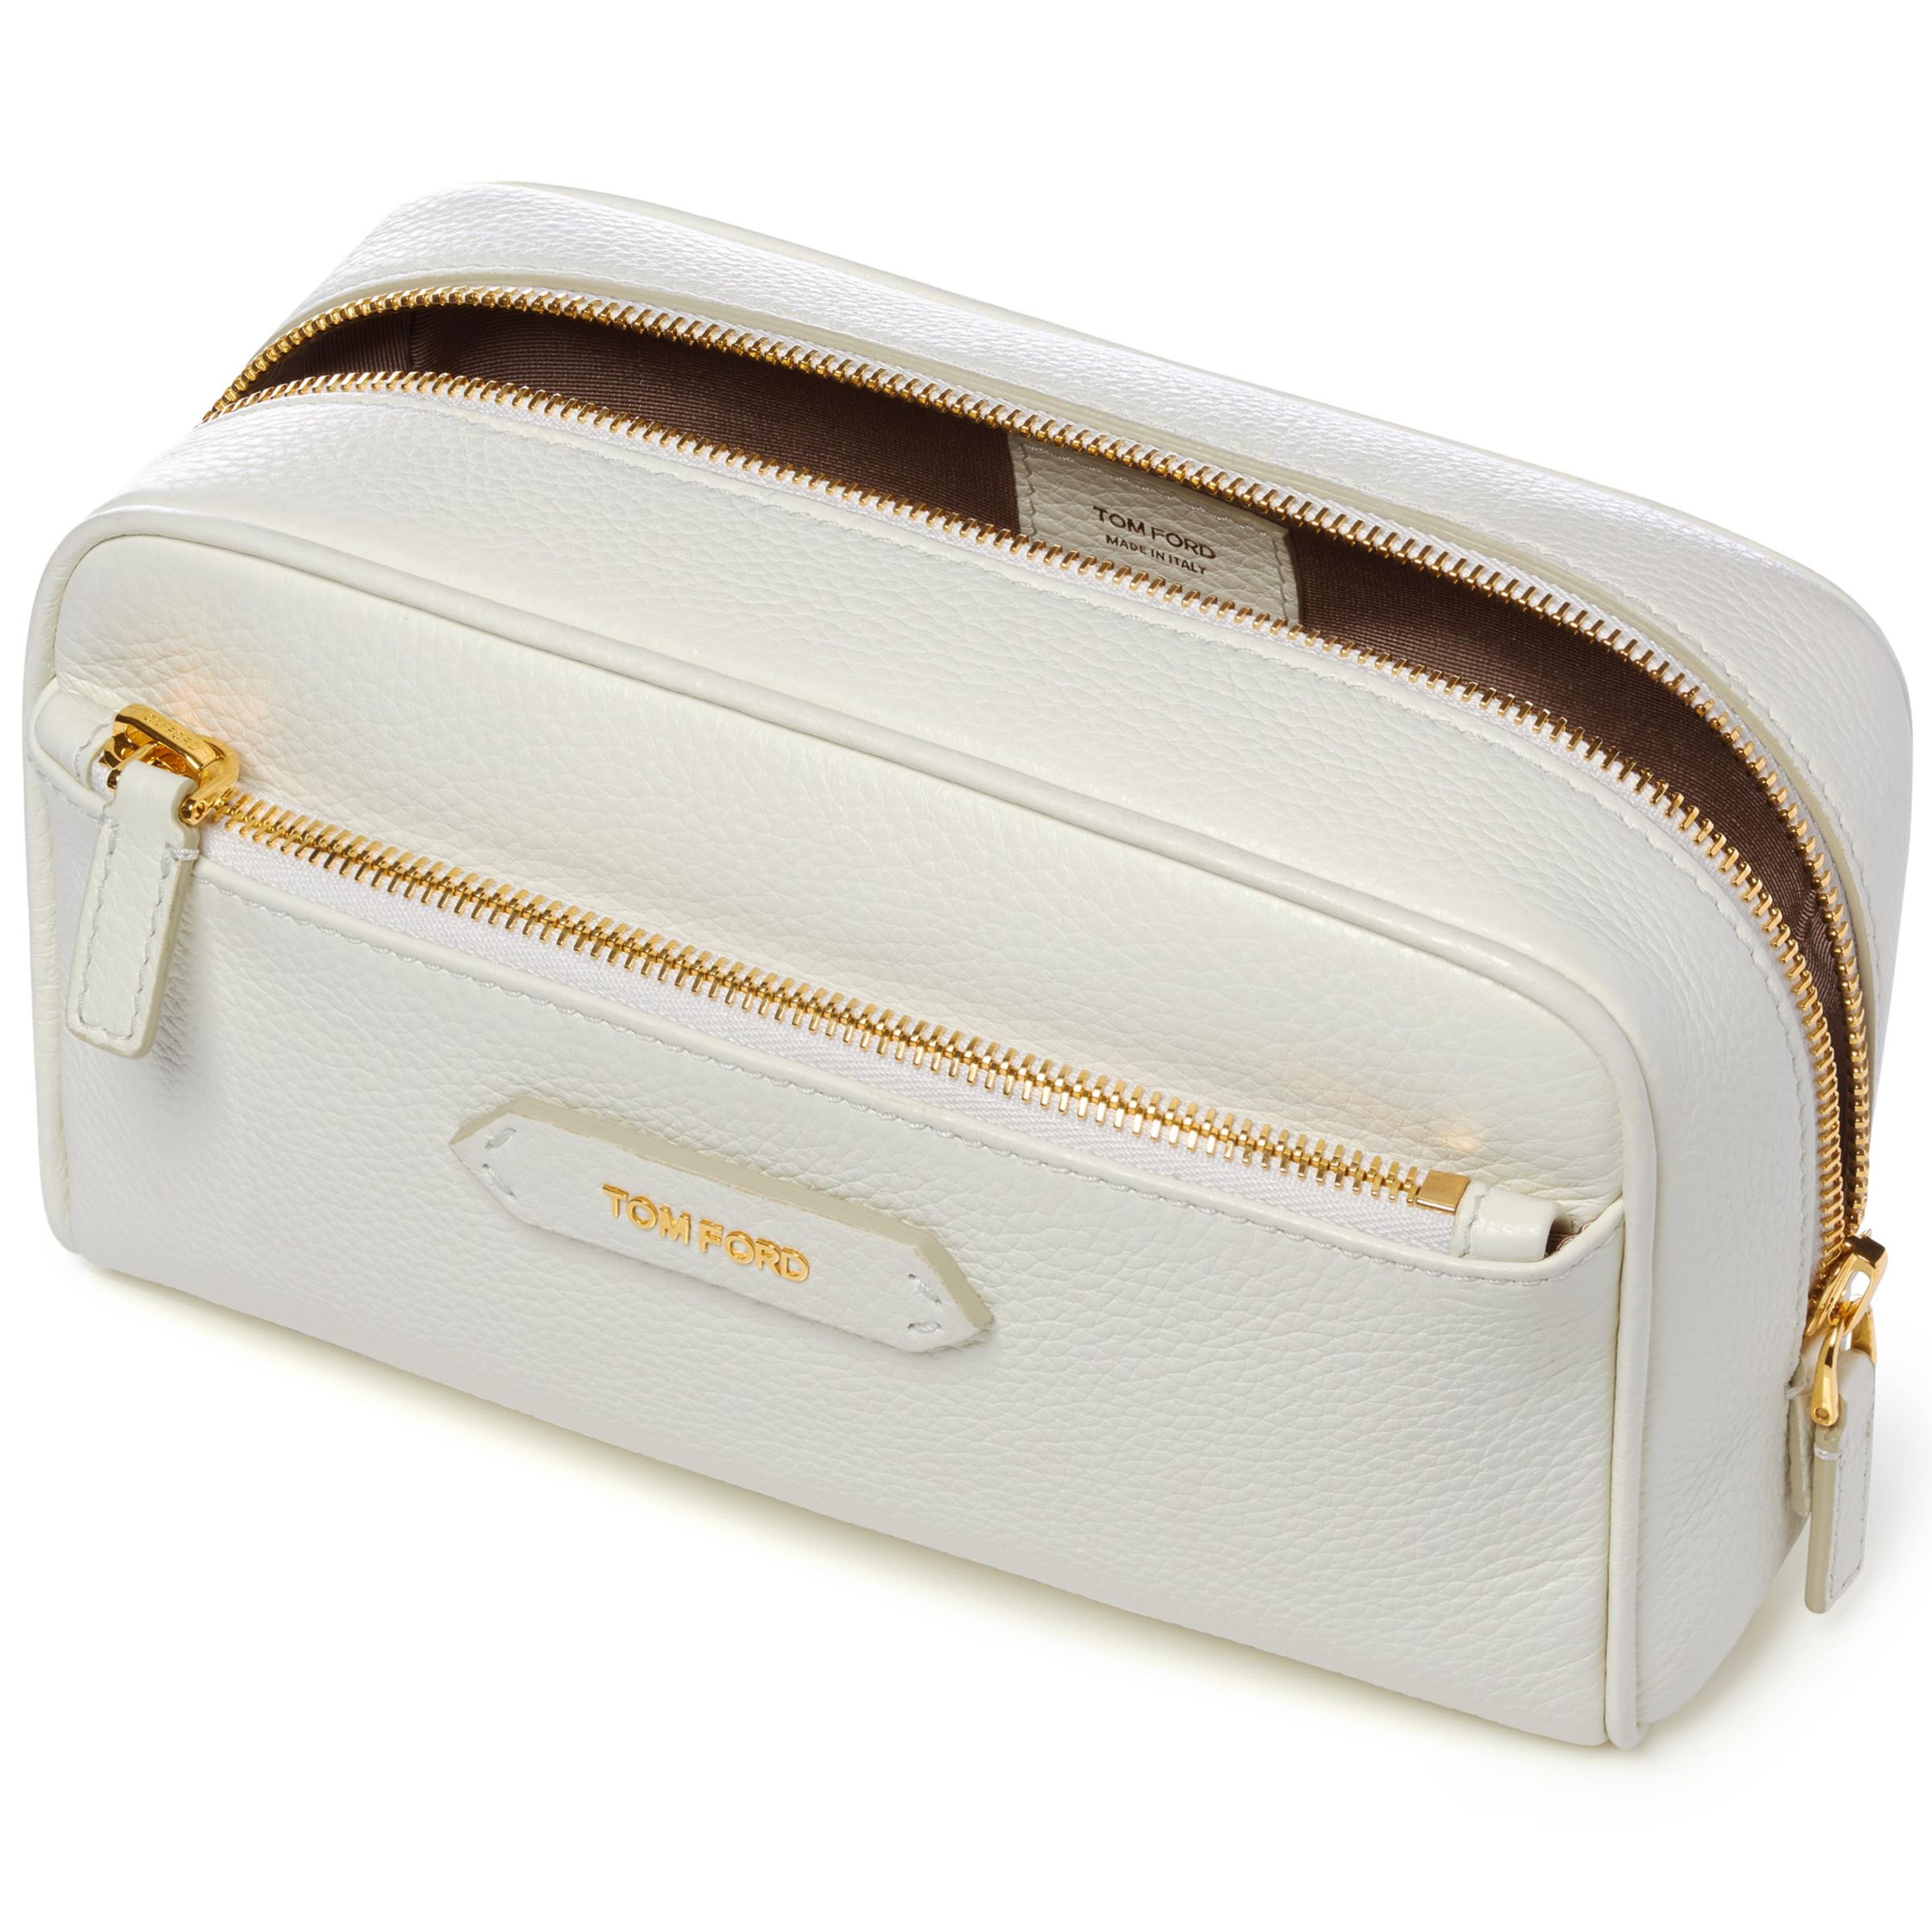 Buy TOM FORD Soleil Small Leather Cosmetic Bag, White | John Lewis